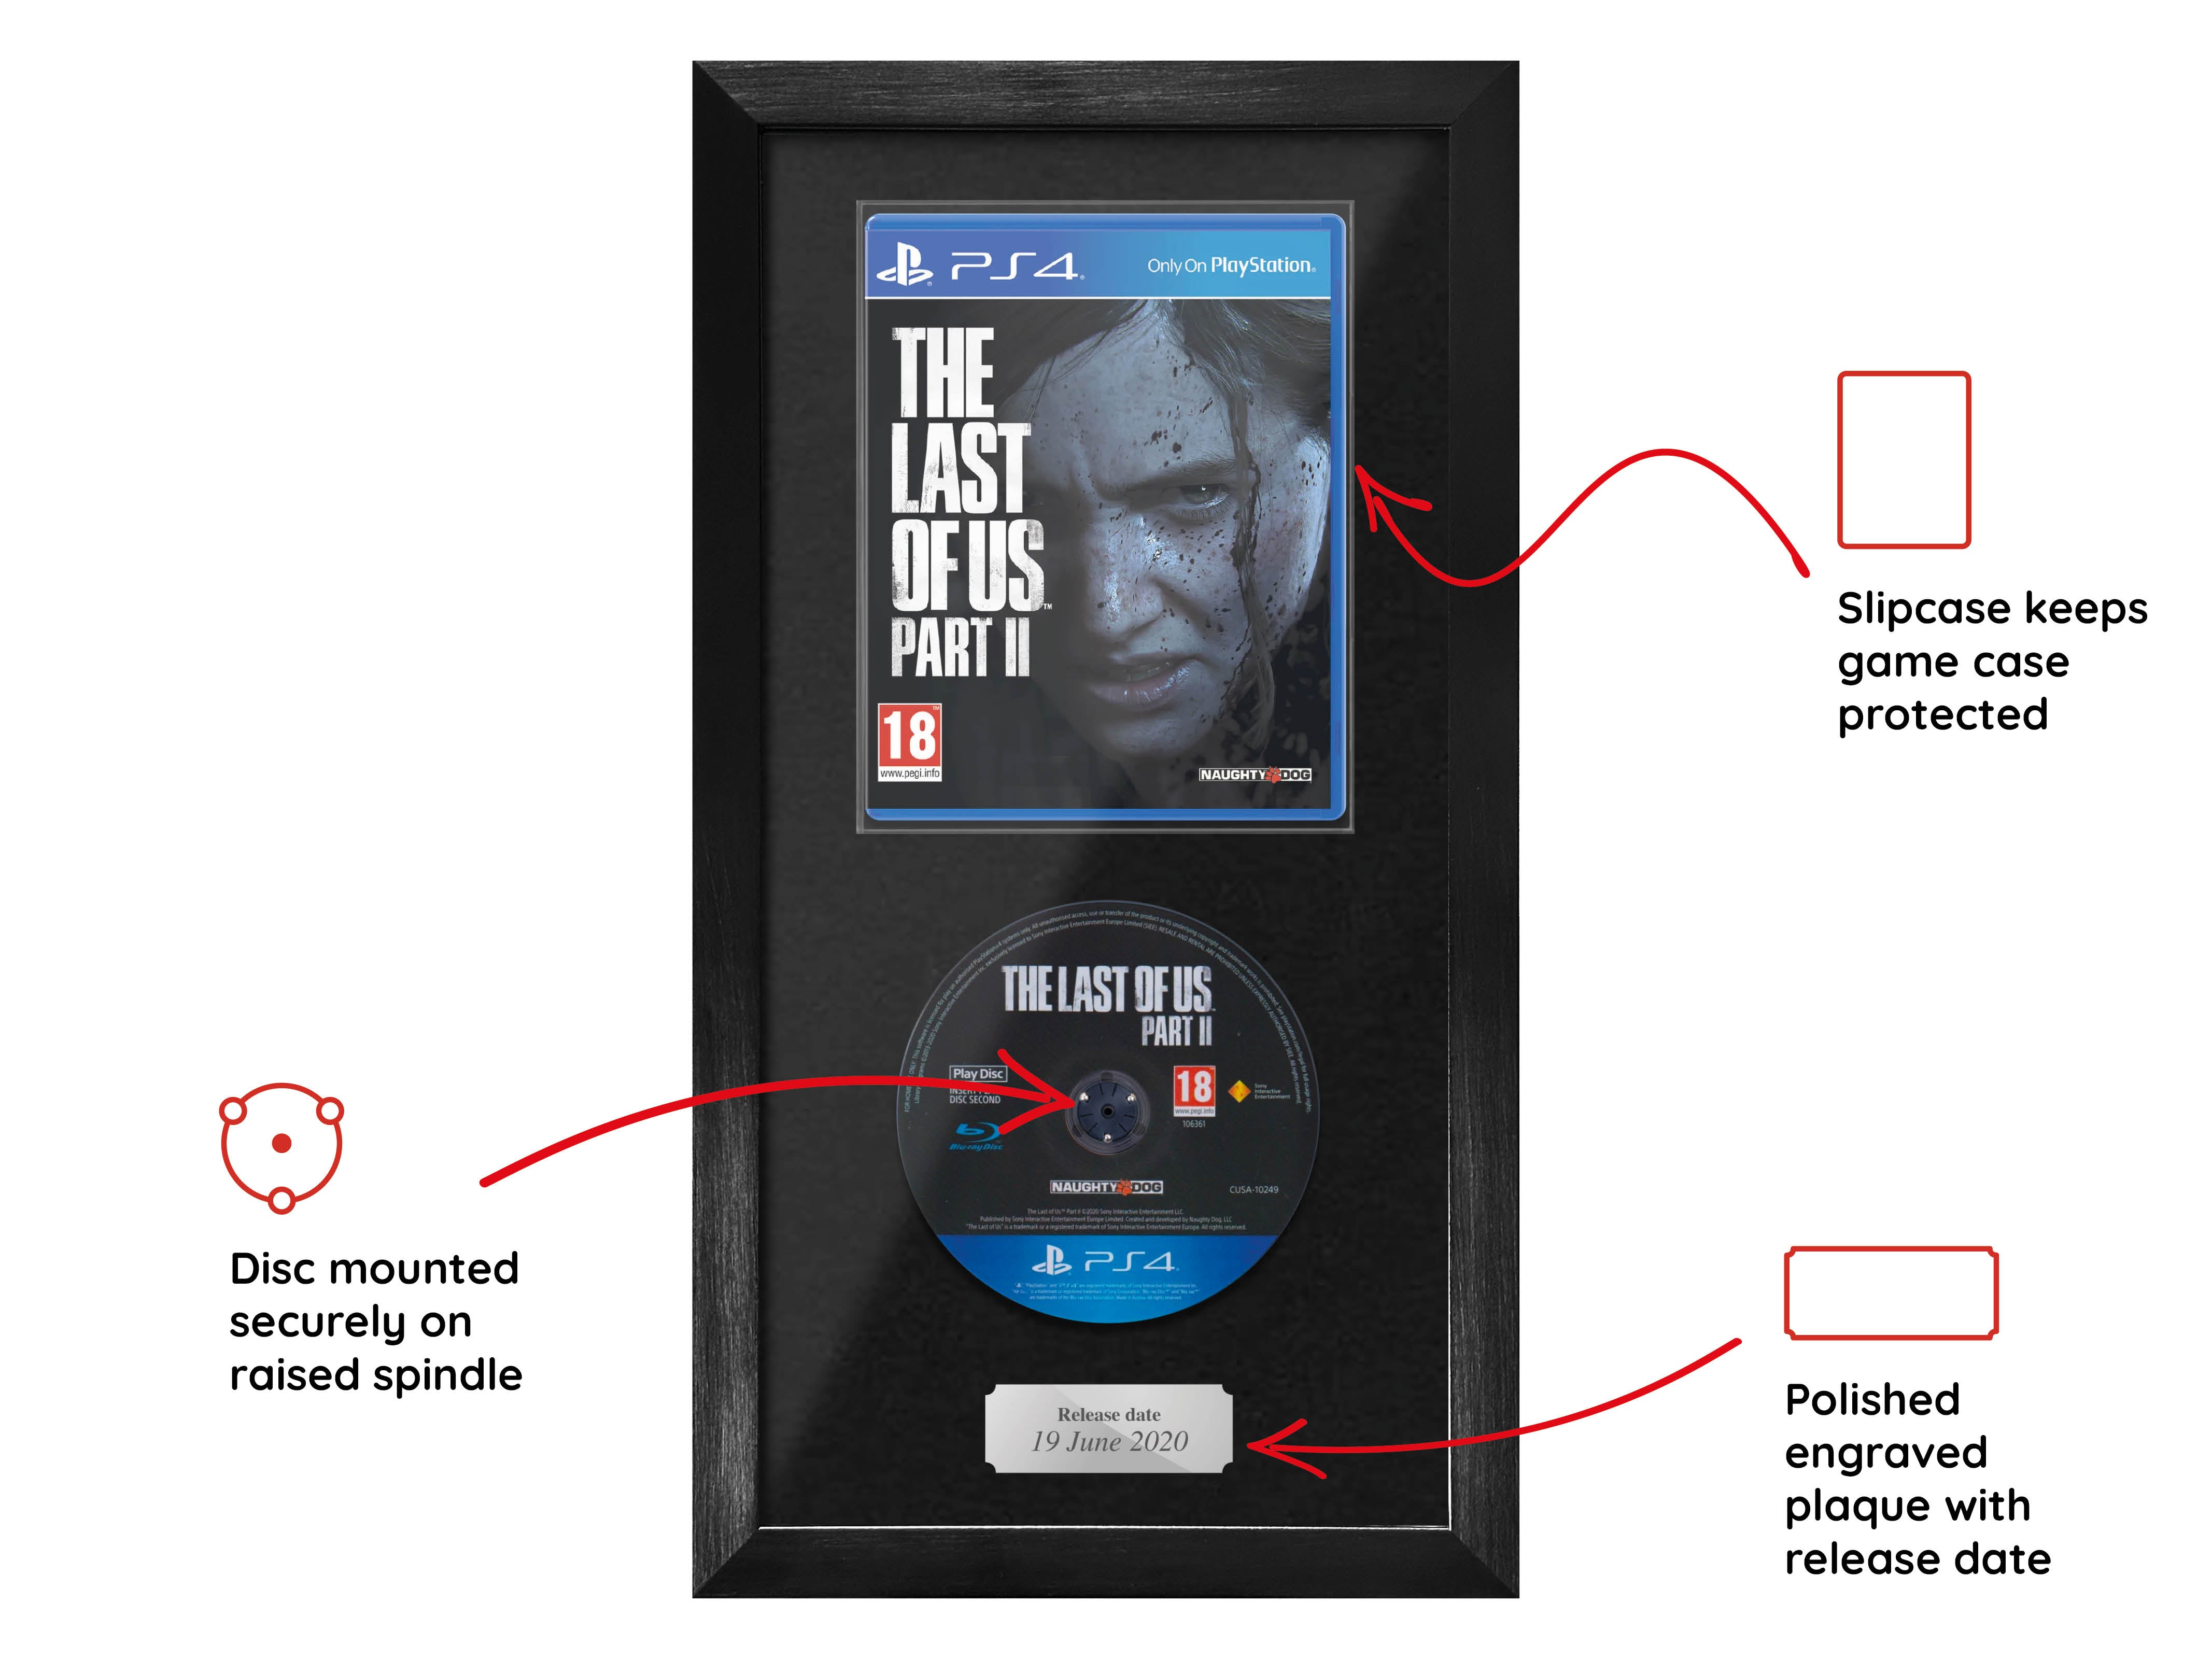 The Last of Us Part II (PS4) Expo Range Framed Game